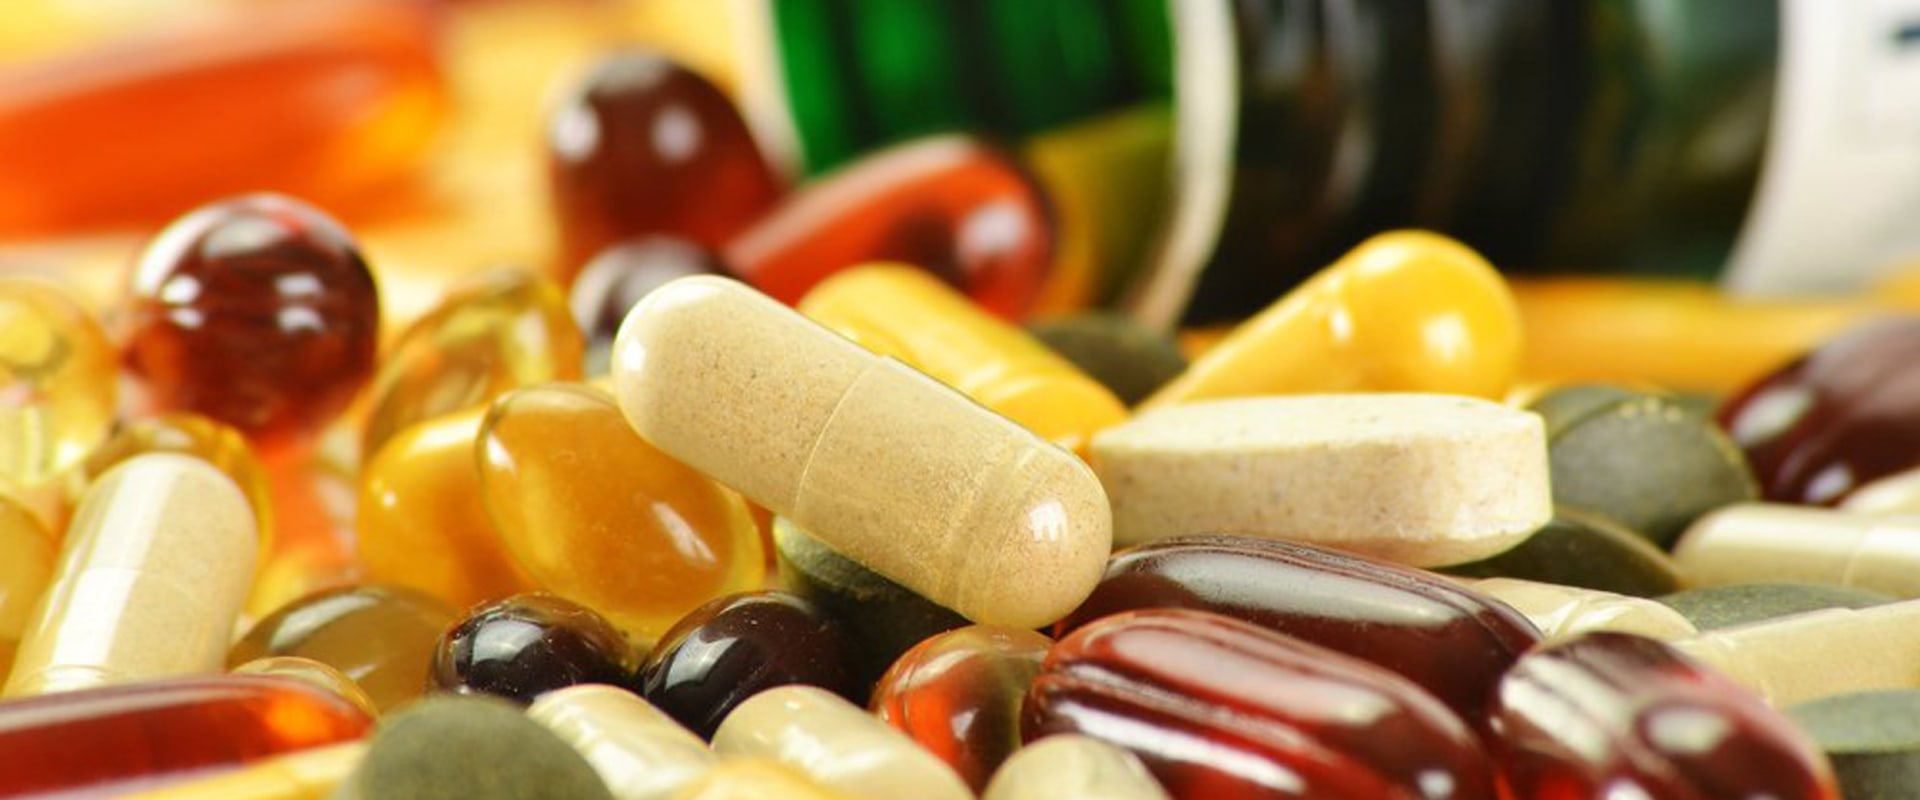 The Difference Between Medical-Grade and Over-the-Counter Vitamin Supplements